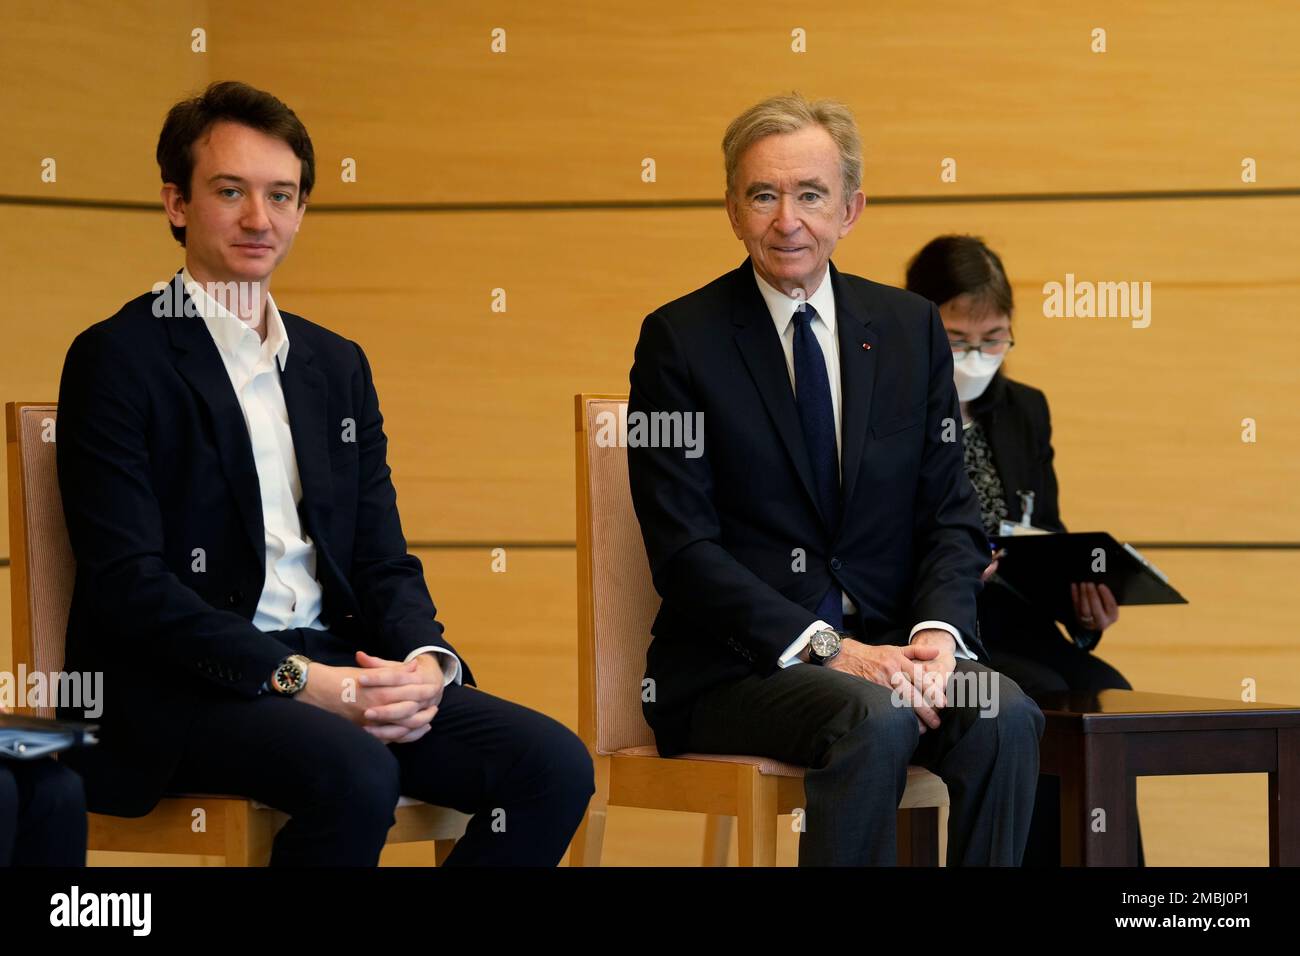 LVMH CEO Bernard Arnault and his son attend the men's final match of the  French Open, played at the Roland Garros stadium in Paris, France, on June  8, 2008. Spain's Nadal won